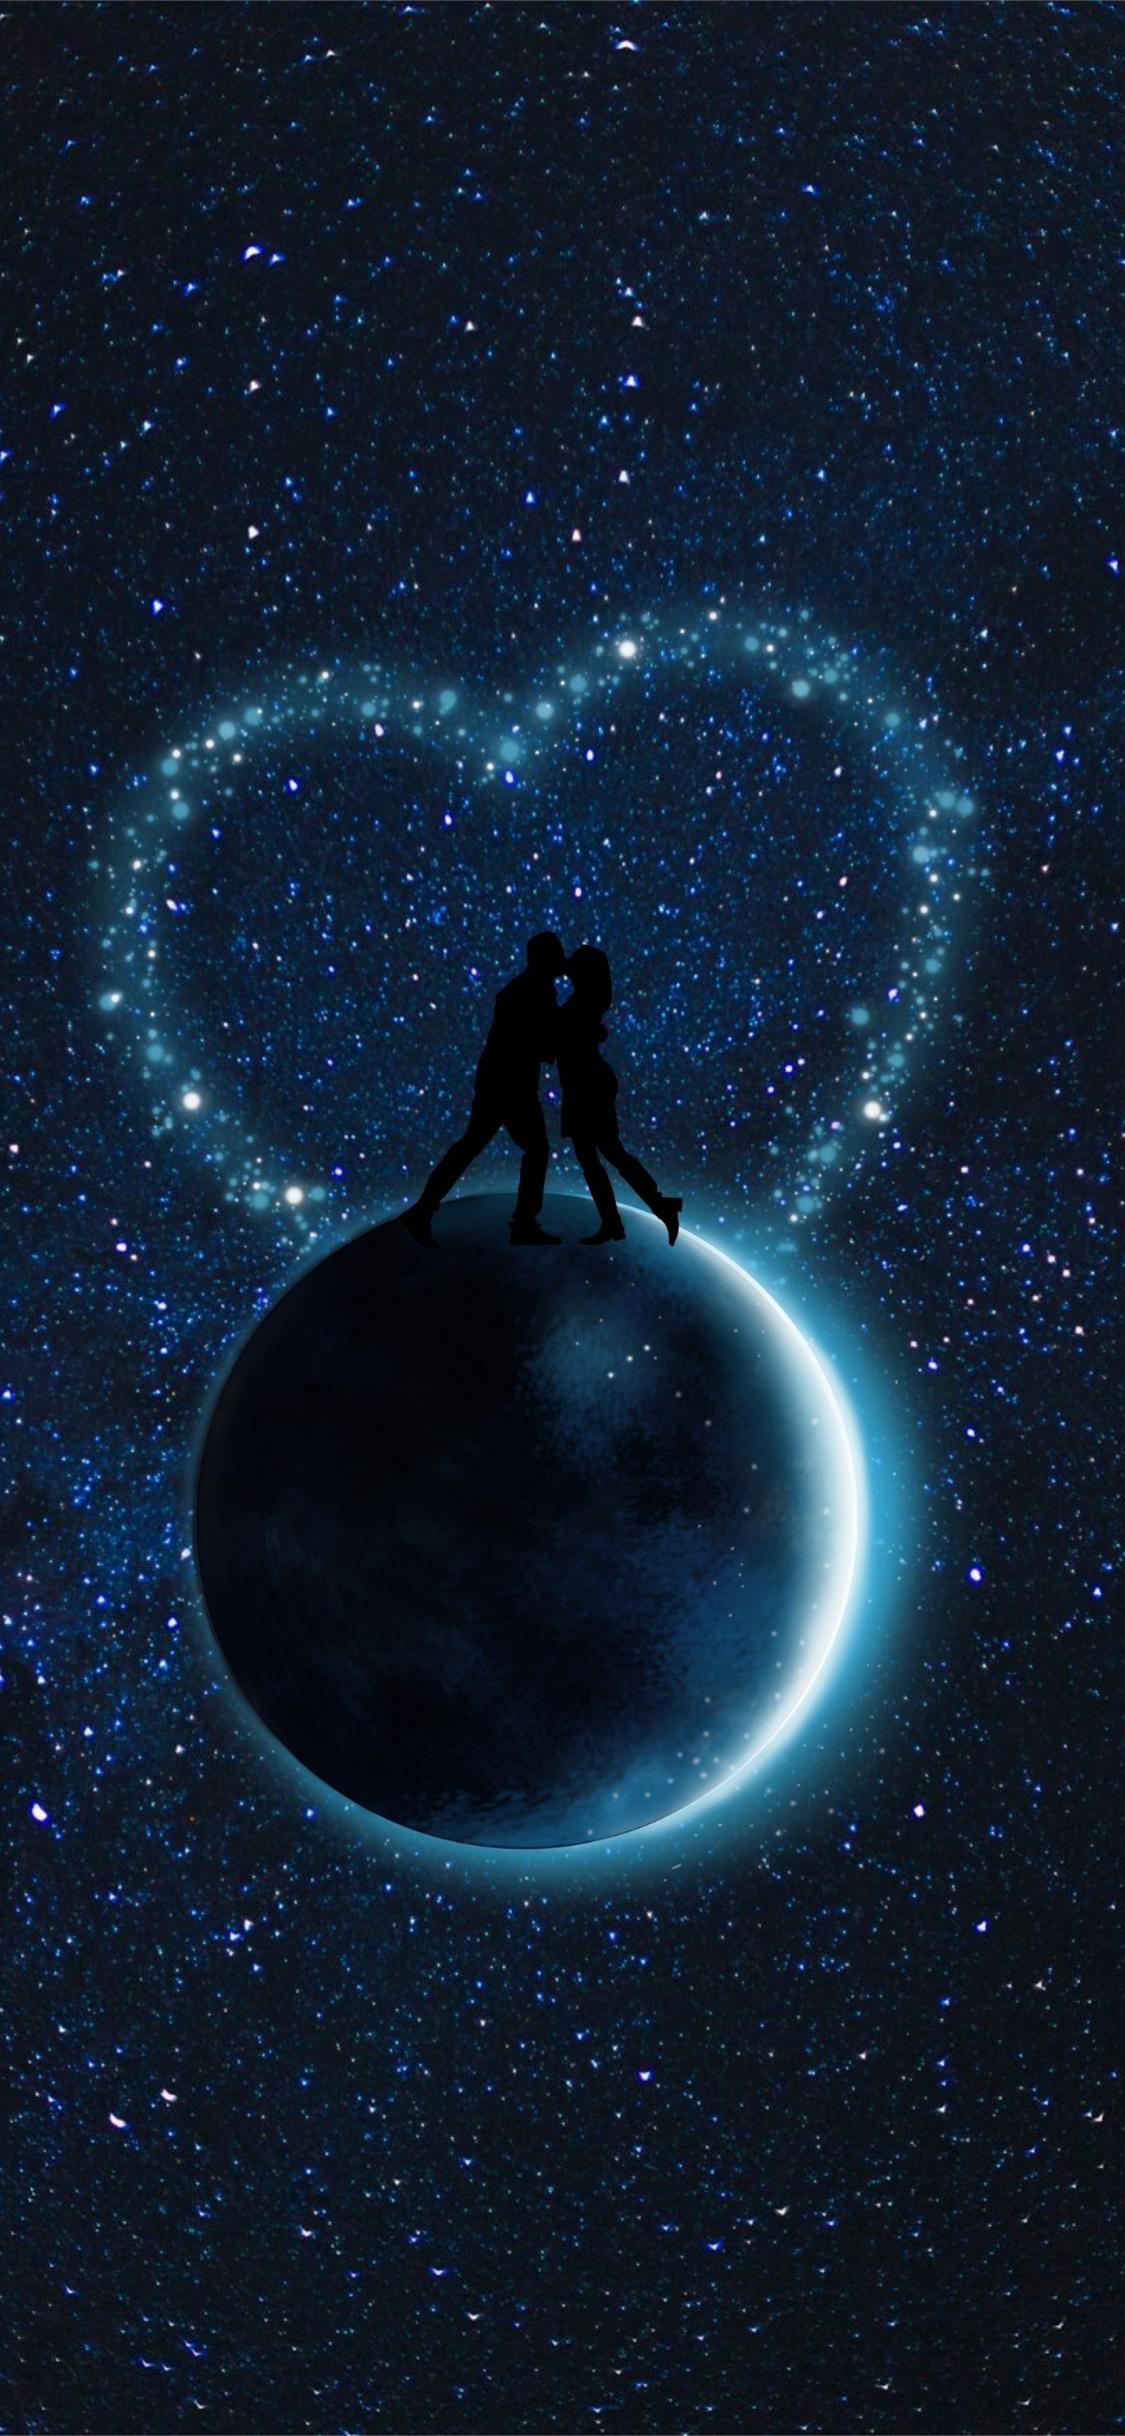 Download 1125x2436 wallpaper starry sky, couple, silhouettes